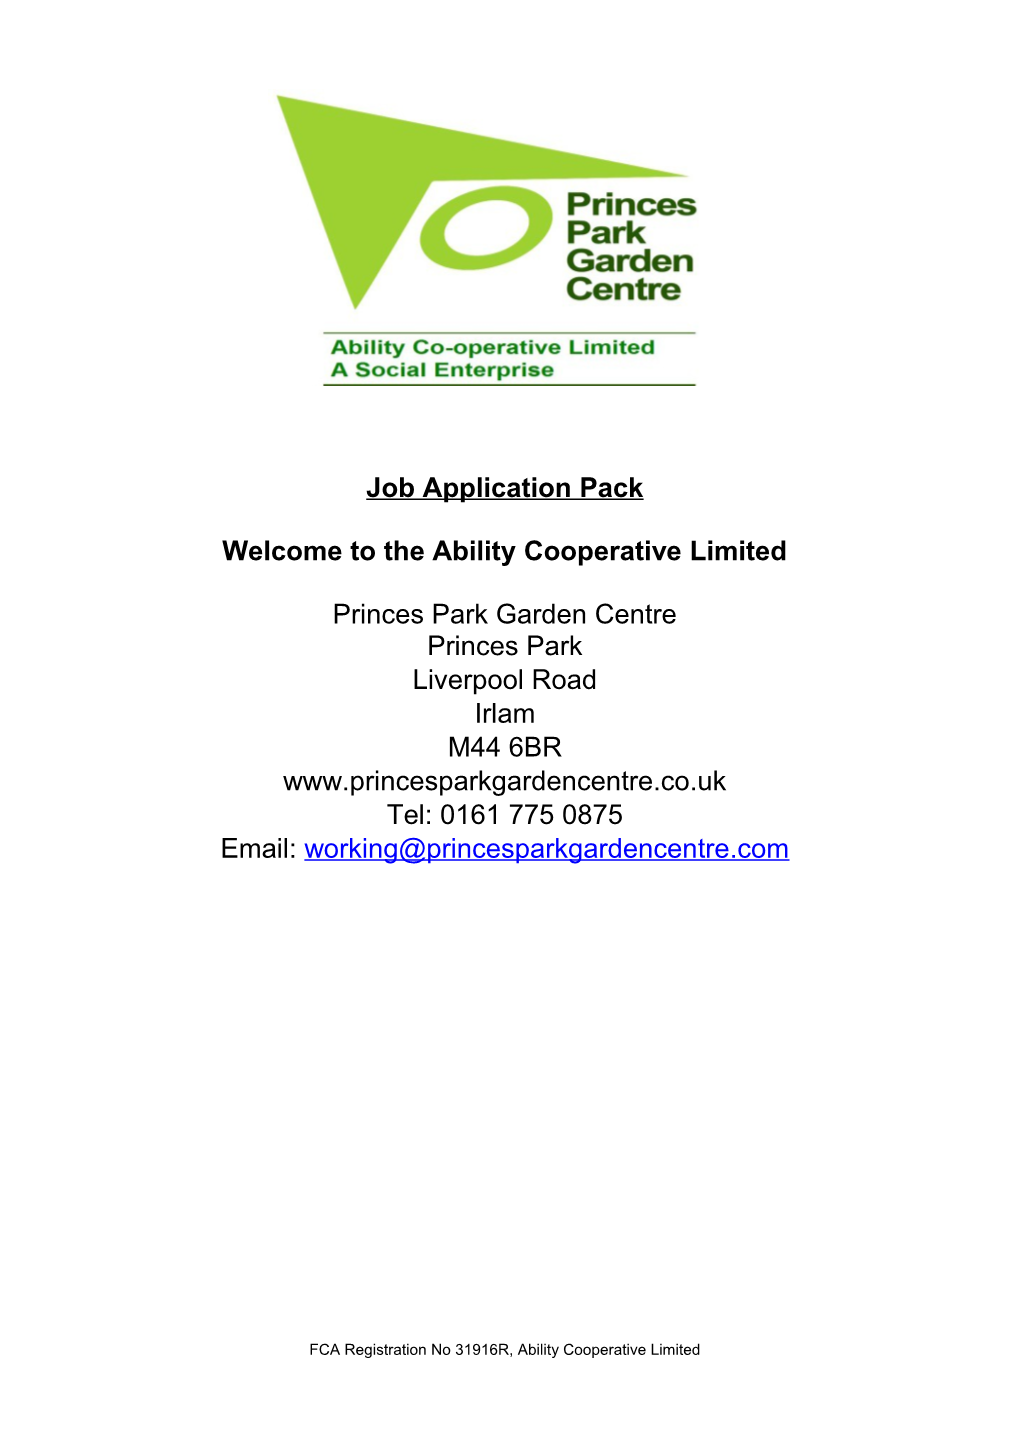 Welcome to the Ability Cooperative Limited